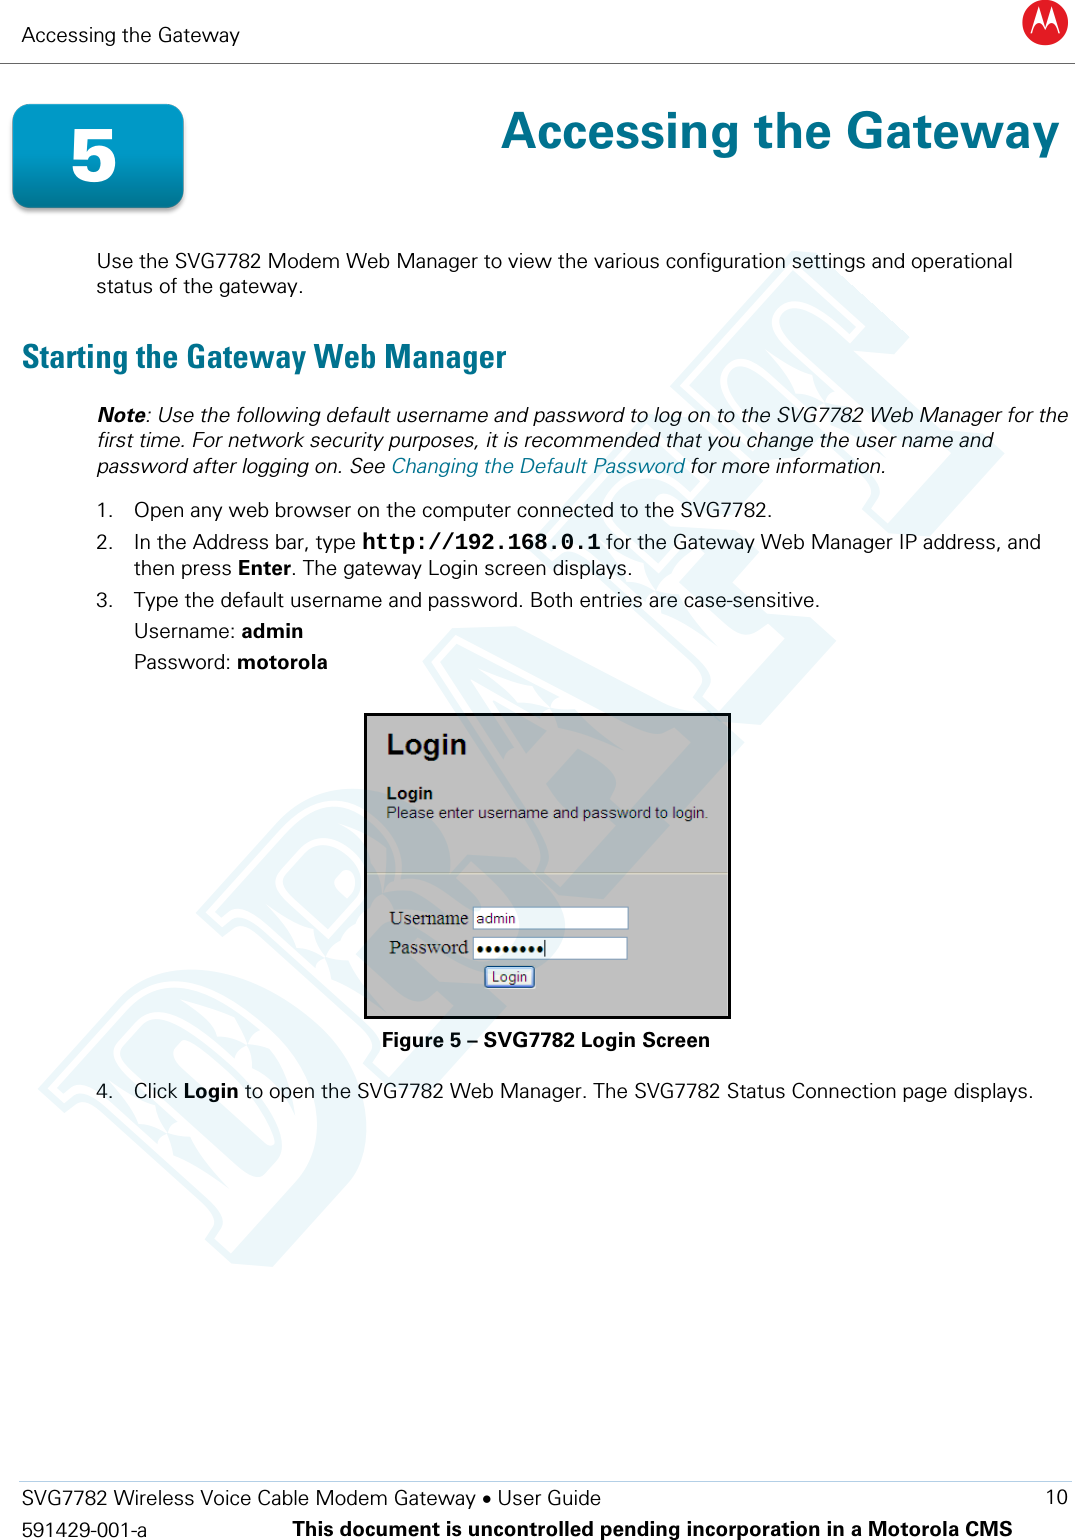 Accessing the Gateway B  SVG7782 Wireless Voice Cable Modem Gateway • User Guide 10 591429-001-a This document is uncontrolled pending incorporation in a Motorola CMS   Accessing the Gateway  Use the SVG7782 Modem Web Manager to view the various configuration settings and operational status of the gateway.  Starting the Gateway Web Manager Note: Use the following default username and password to log on to the SVG7782 Web Manager for the first time. For network security purposes, it is recommended that you change the user name and password after logging on. See Changing the Default Password for more information. 1. Open any web browser on the computer connected to the SVG7782. 2. In the Address bar, type http://192.168.0.1 for the Gateway Web Manager IP address, and then press Enter. The gateway Login screen displays. 3. Type the default username and password. Both entries are case-sensitive. Username: admin Password: motorola  Figure 5 – SVG7782 Login Screen 4. Click Login to open the SVG7782 Web Manager. The SVG7782 Status Connection page displays. 5 DRAFT